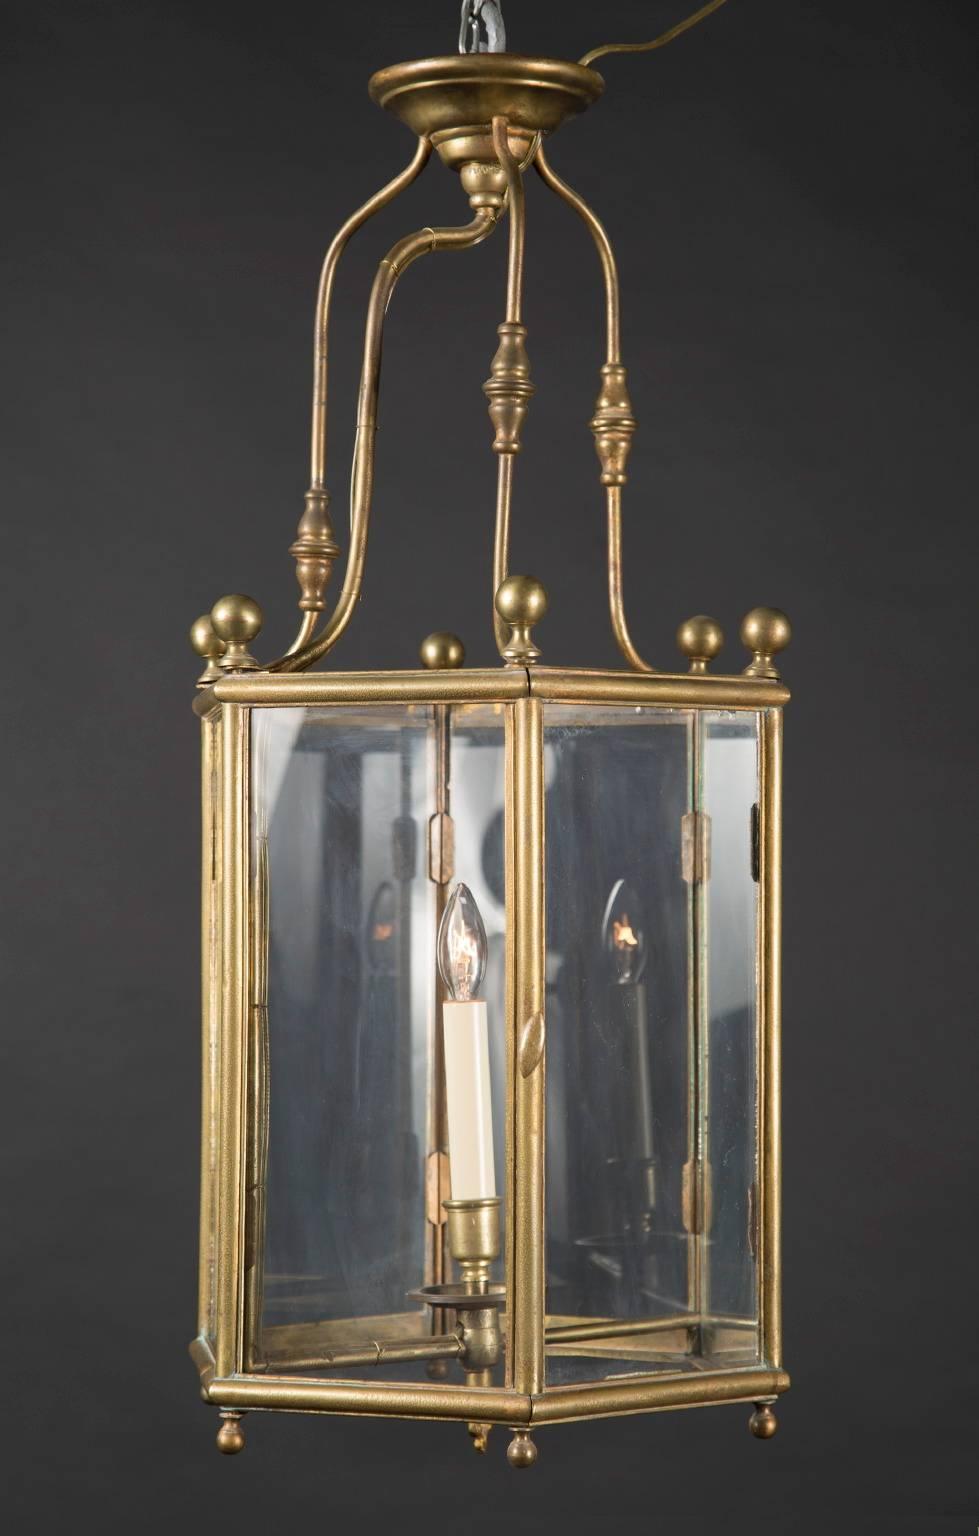 This Louis XVI hexagonal lantern is made of brass and features one door and one internal light. The French antique piece dates back to the 19th century, and is decorated with a knob at each corner of the top. Smaller knobs rest below at each corner